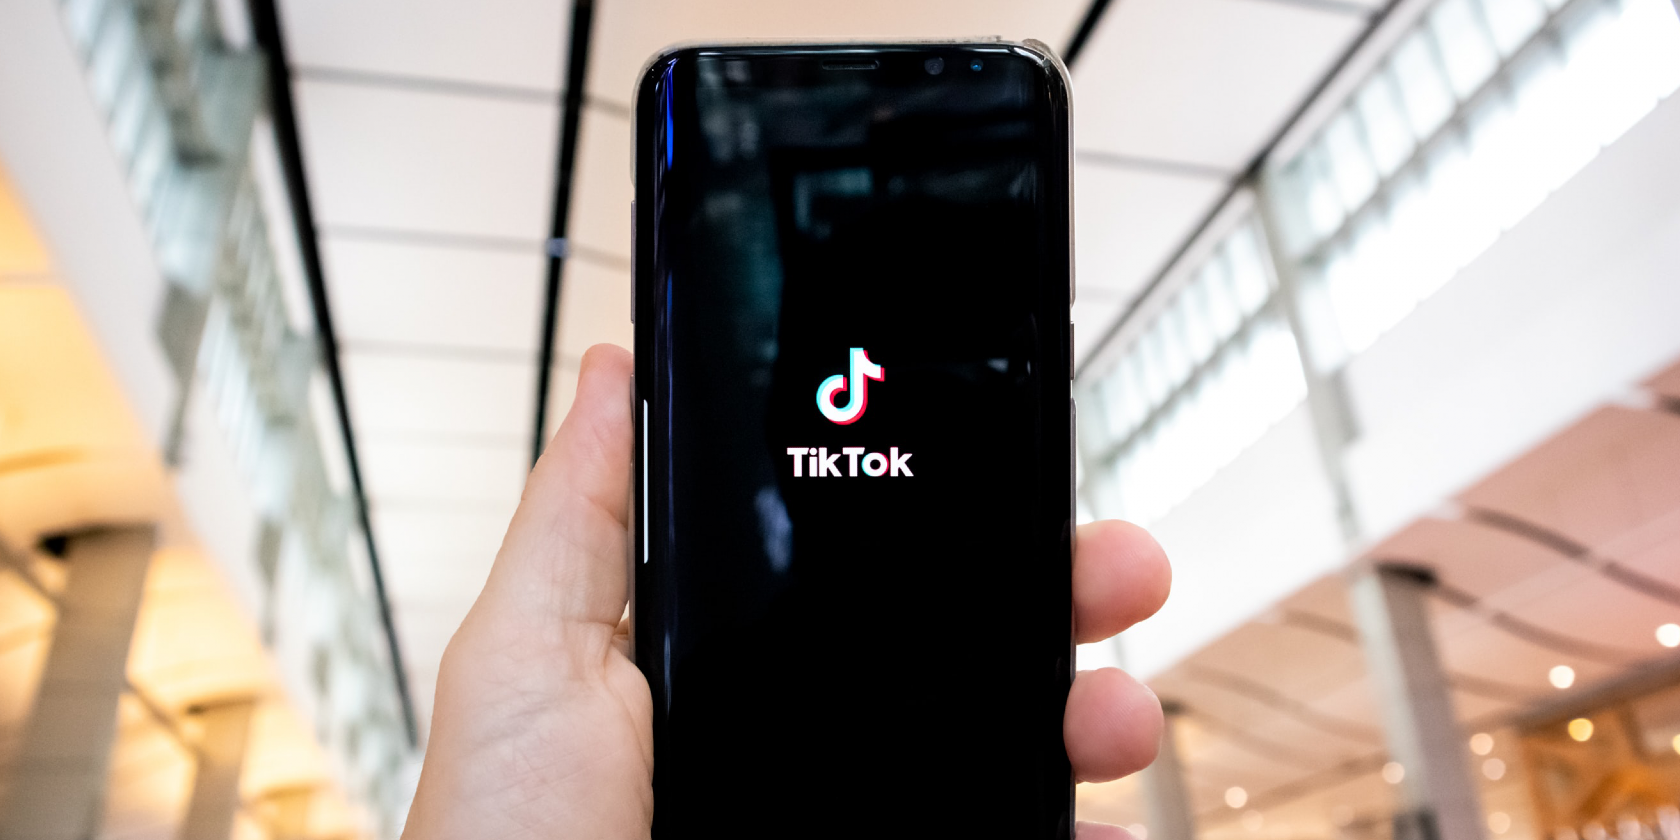 Photo of person holding phone with TikTok screen on it